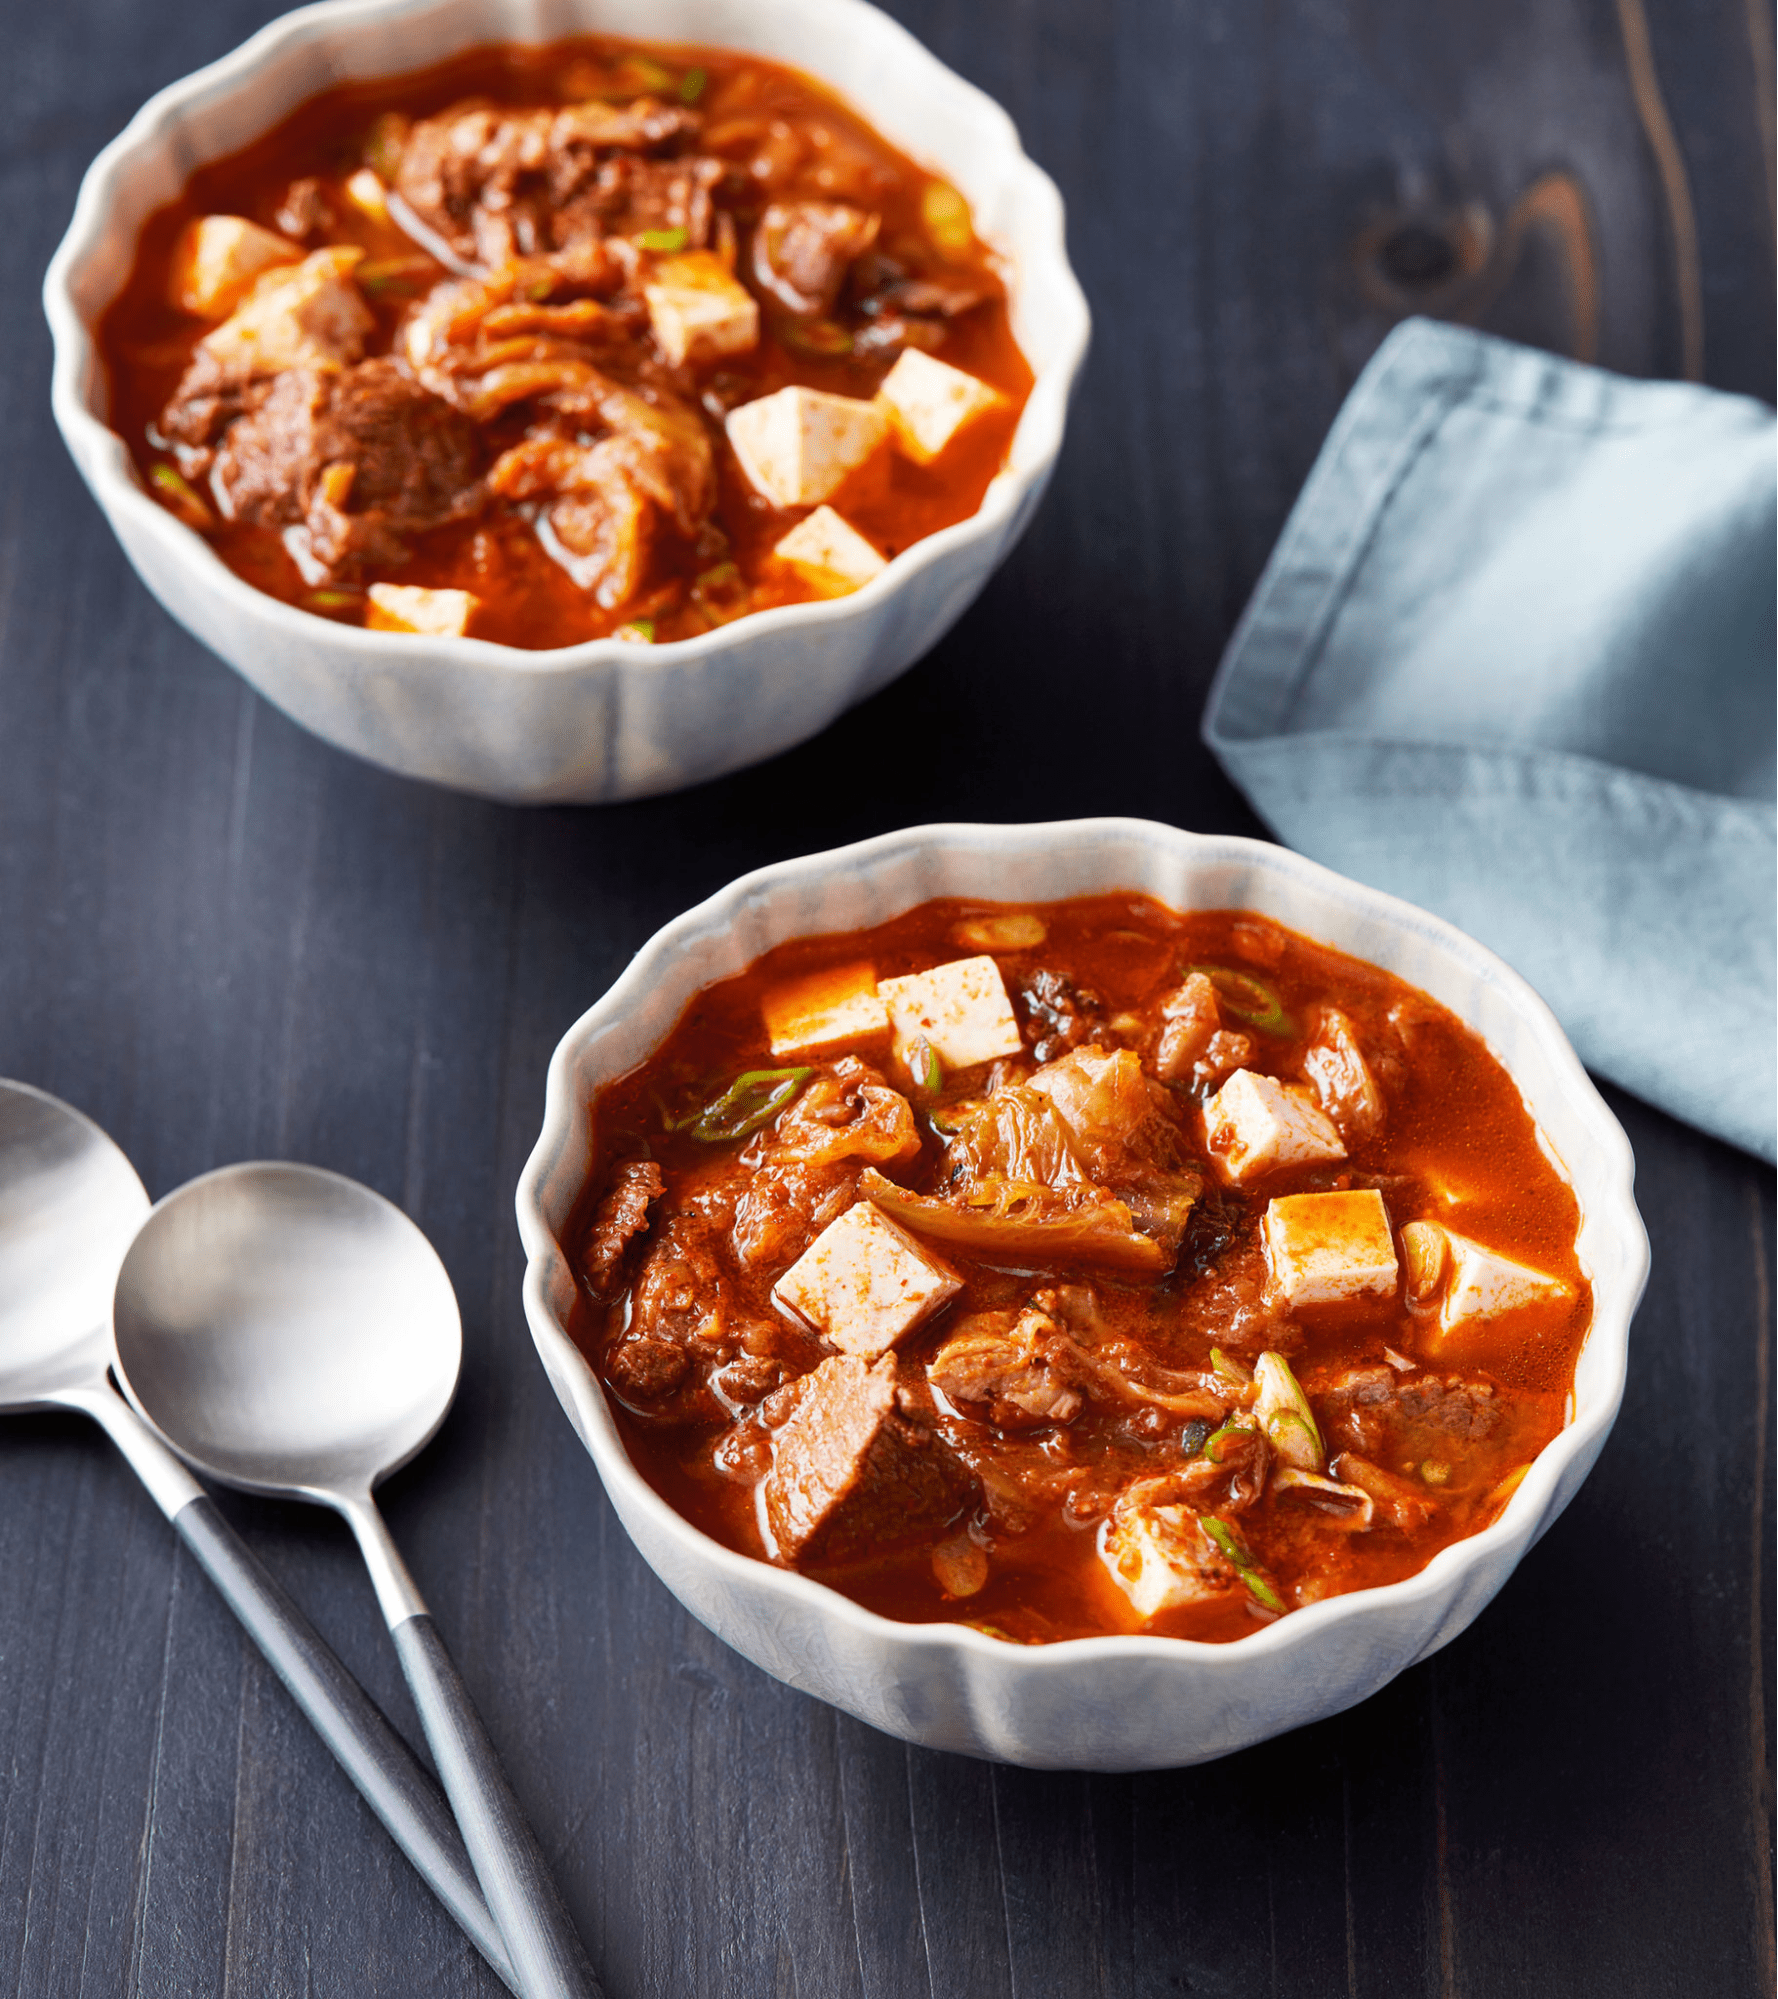 Easy Christmas Recipes - Beef stew with kimchi